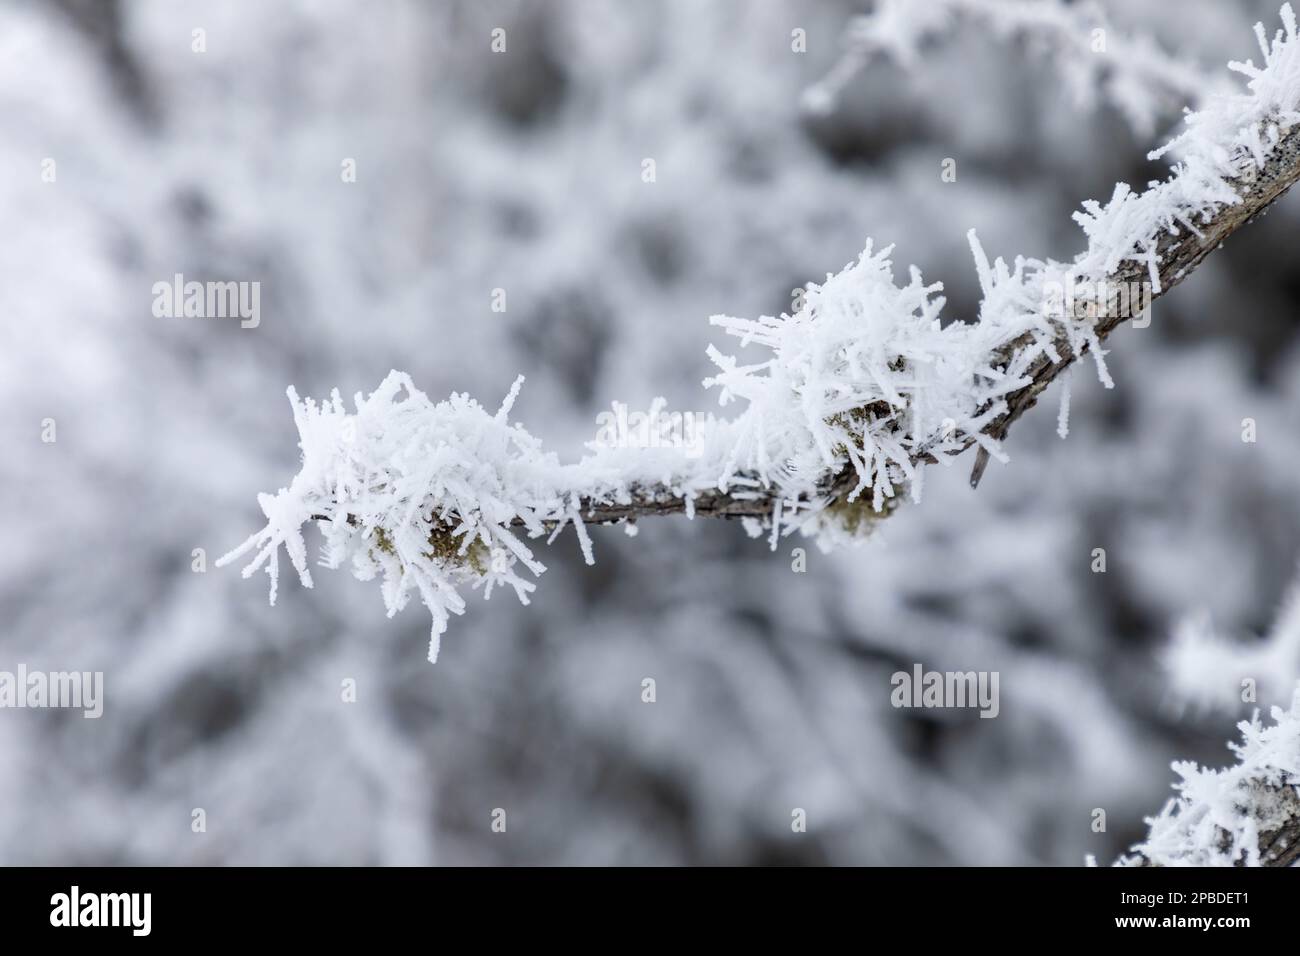 Hoar frost covers trees and forms feathery crystals in the humid Northern Minnesota air on Gunflint Lake near the Boundary Waters Canoe Area Wildernes Stock Photo